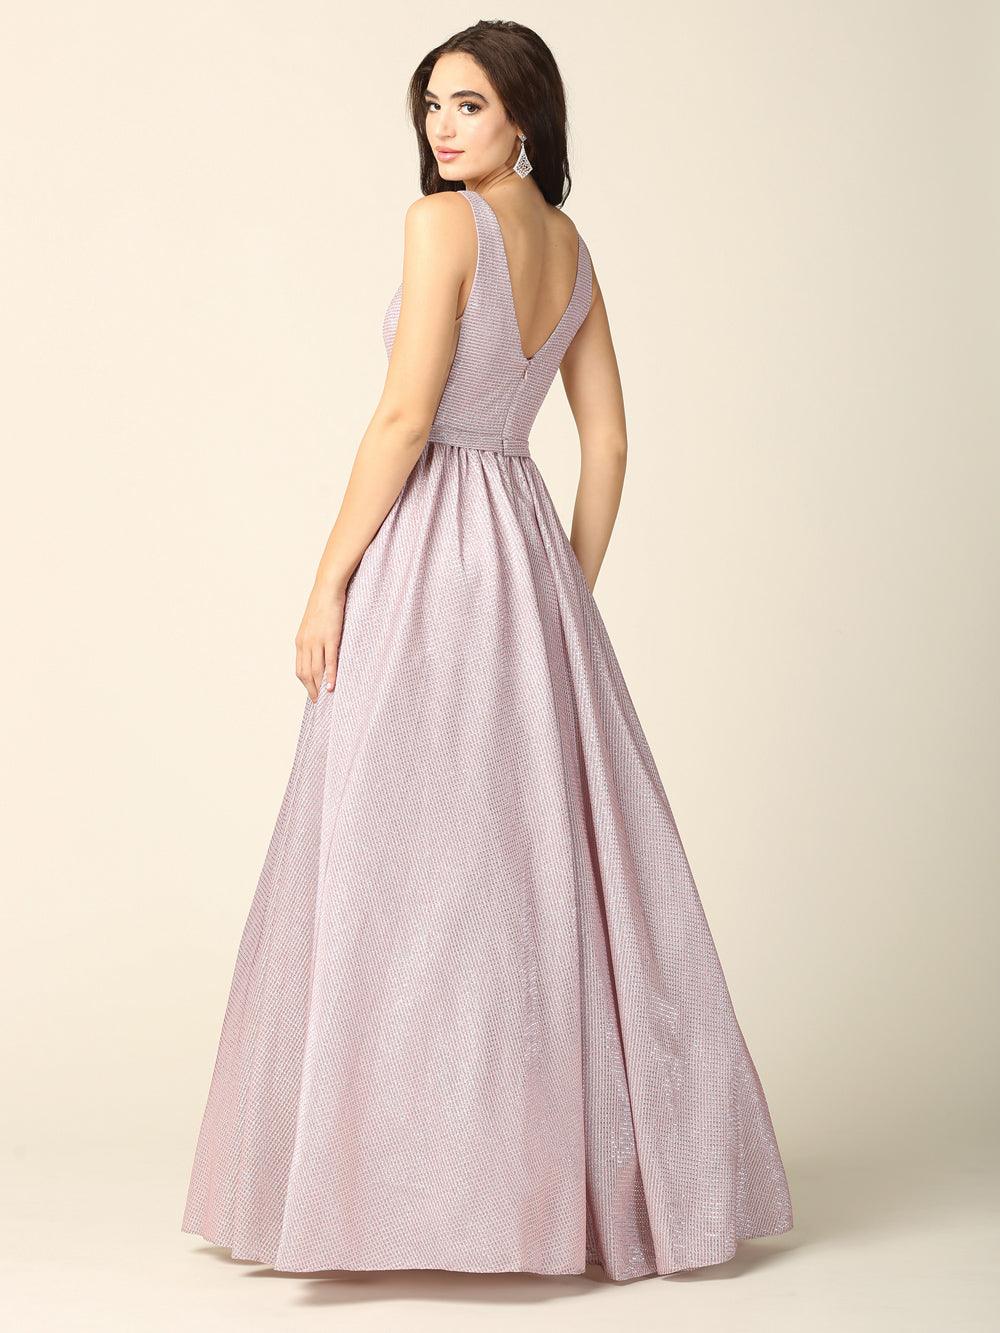 Prom Long Sleeveless Formal Metallic Ball Gown - The Dress Outlet